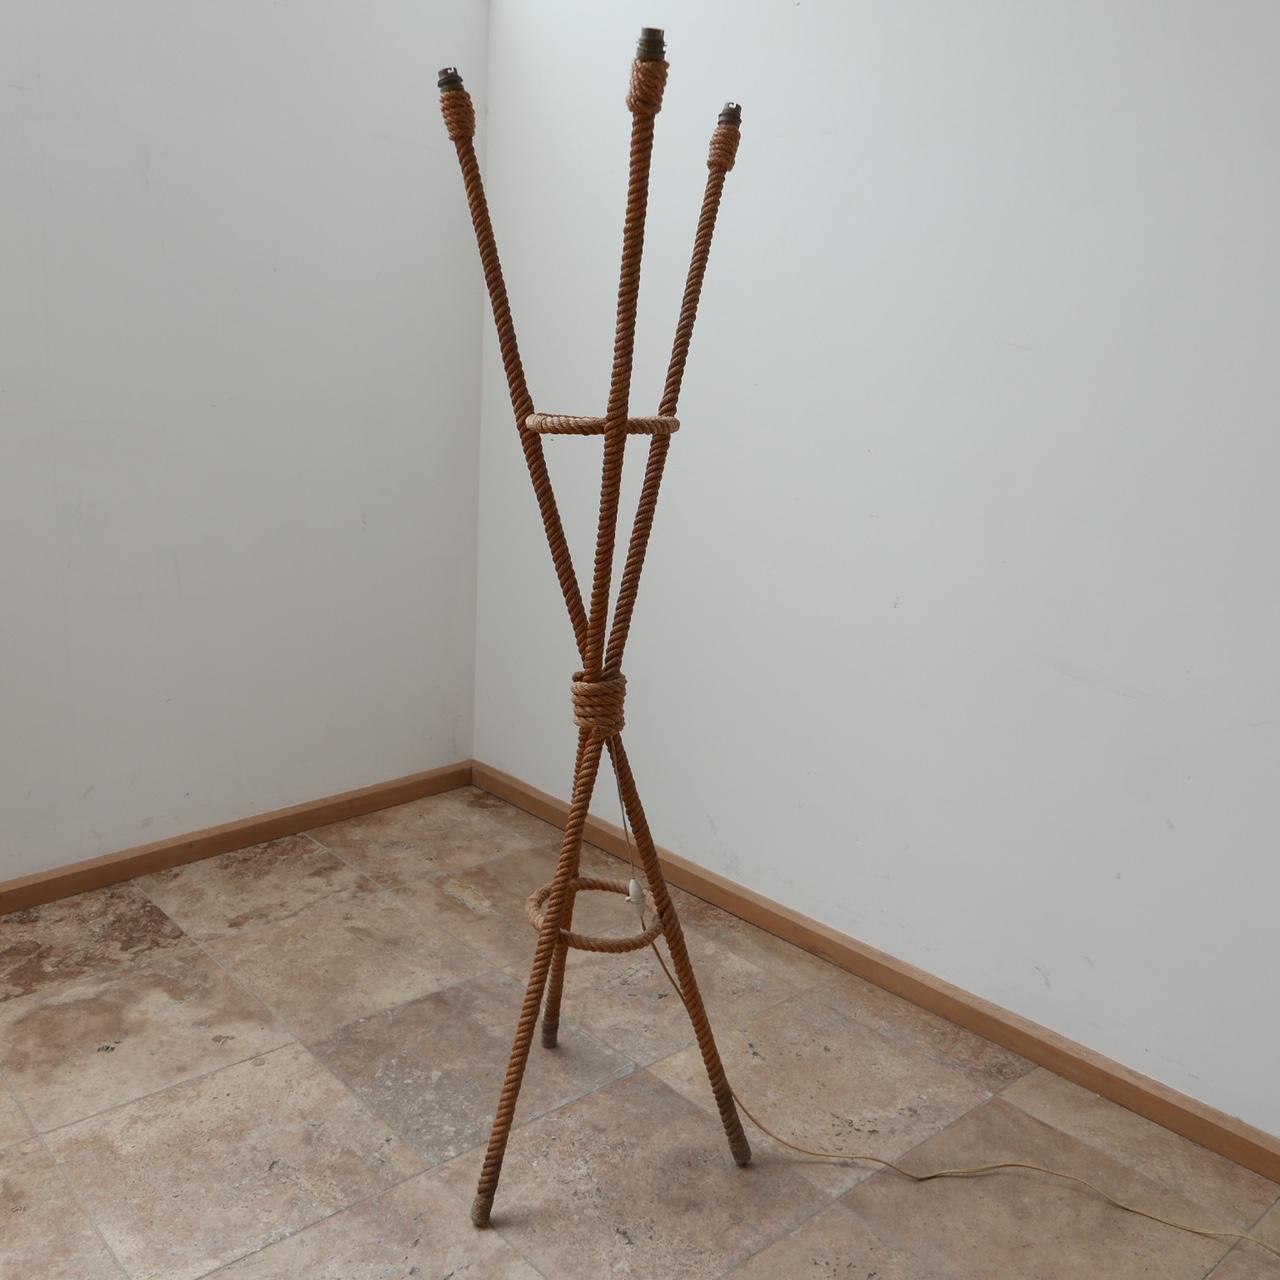 A scarce floor lamp by Audoux-Minet. 

France, c1960s. 

Rope work typical of their work. 

Three arms and legs. 

Some dirt and wear to the legs commensurate with age. 

Dimensions: 146 H x 40 D x 40 W in cm. 

Delivery: POA.

   